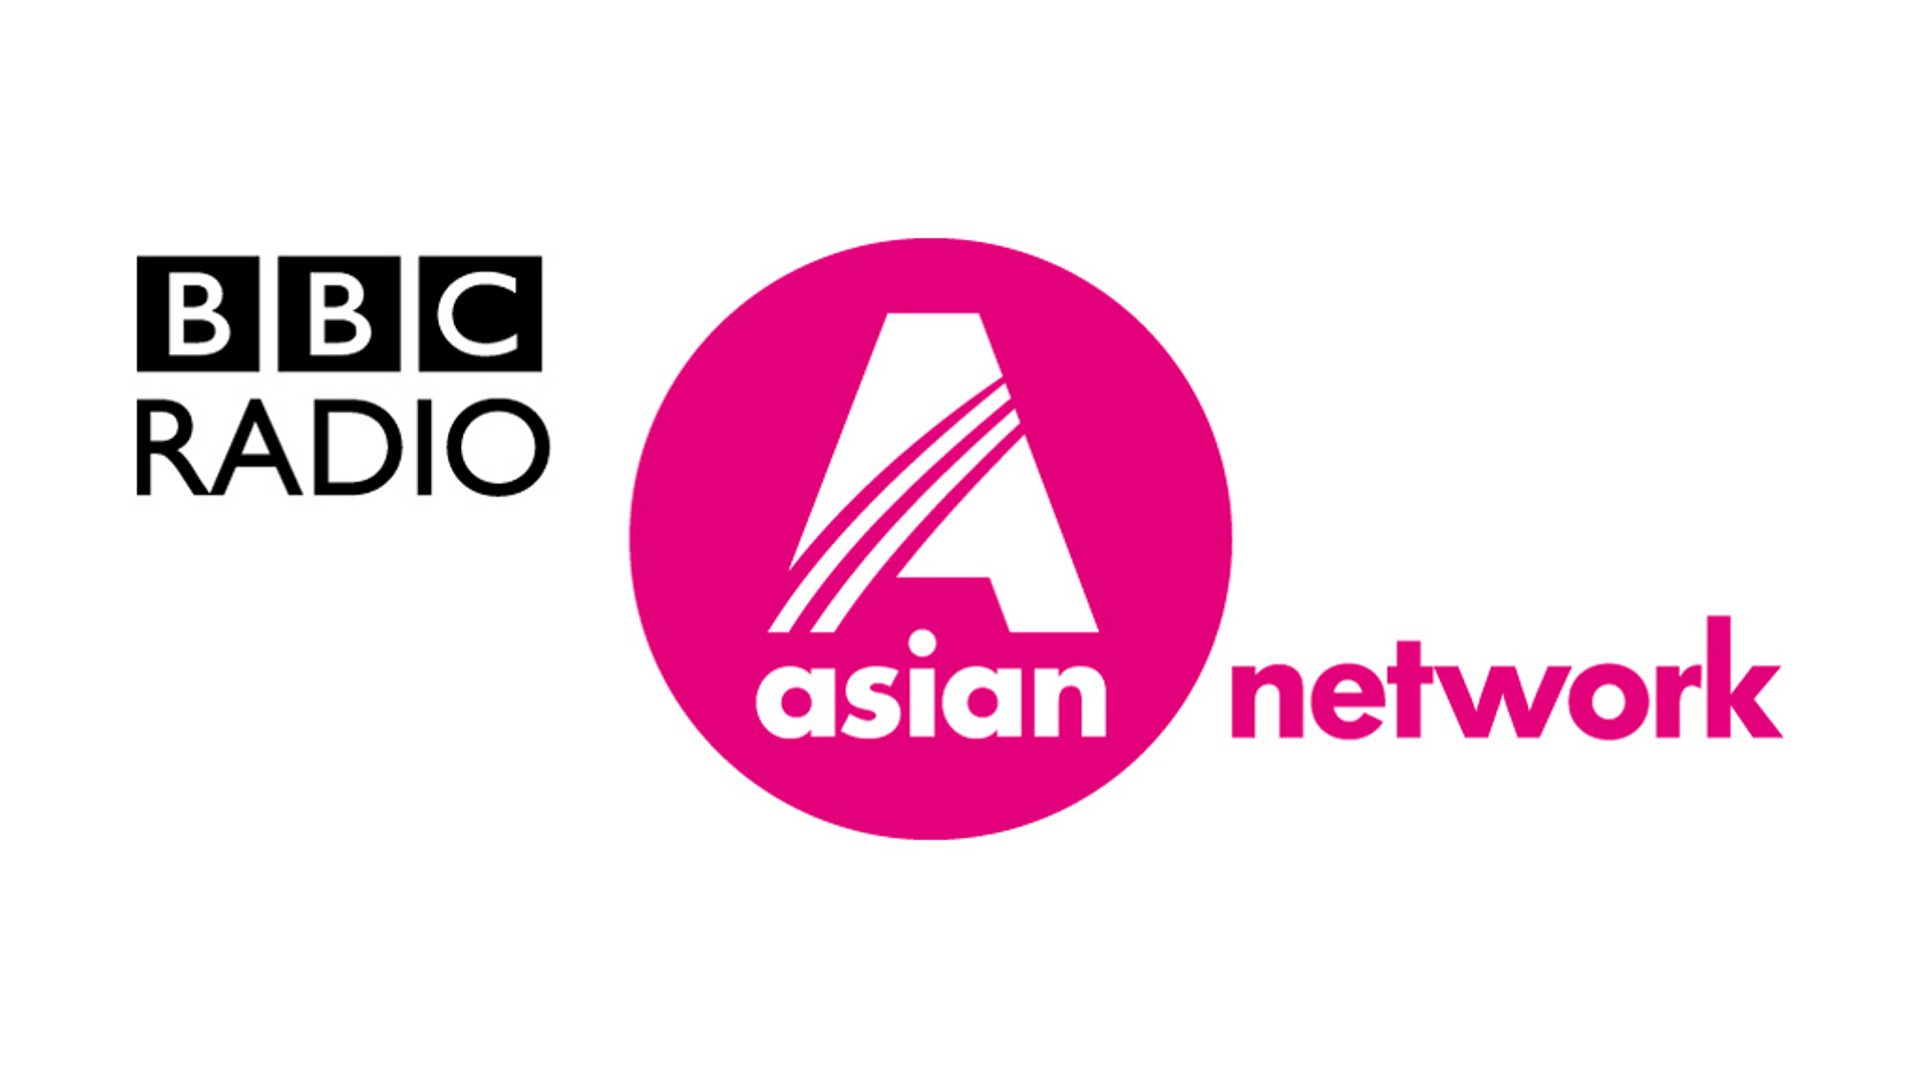 Asian Network Download Chart